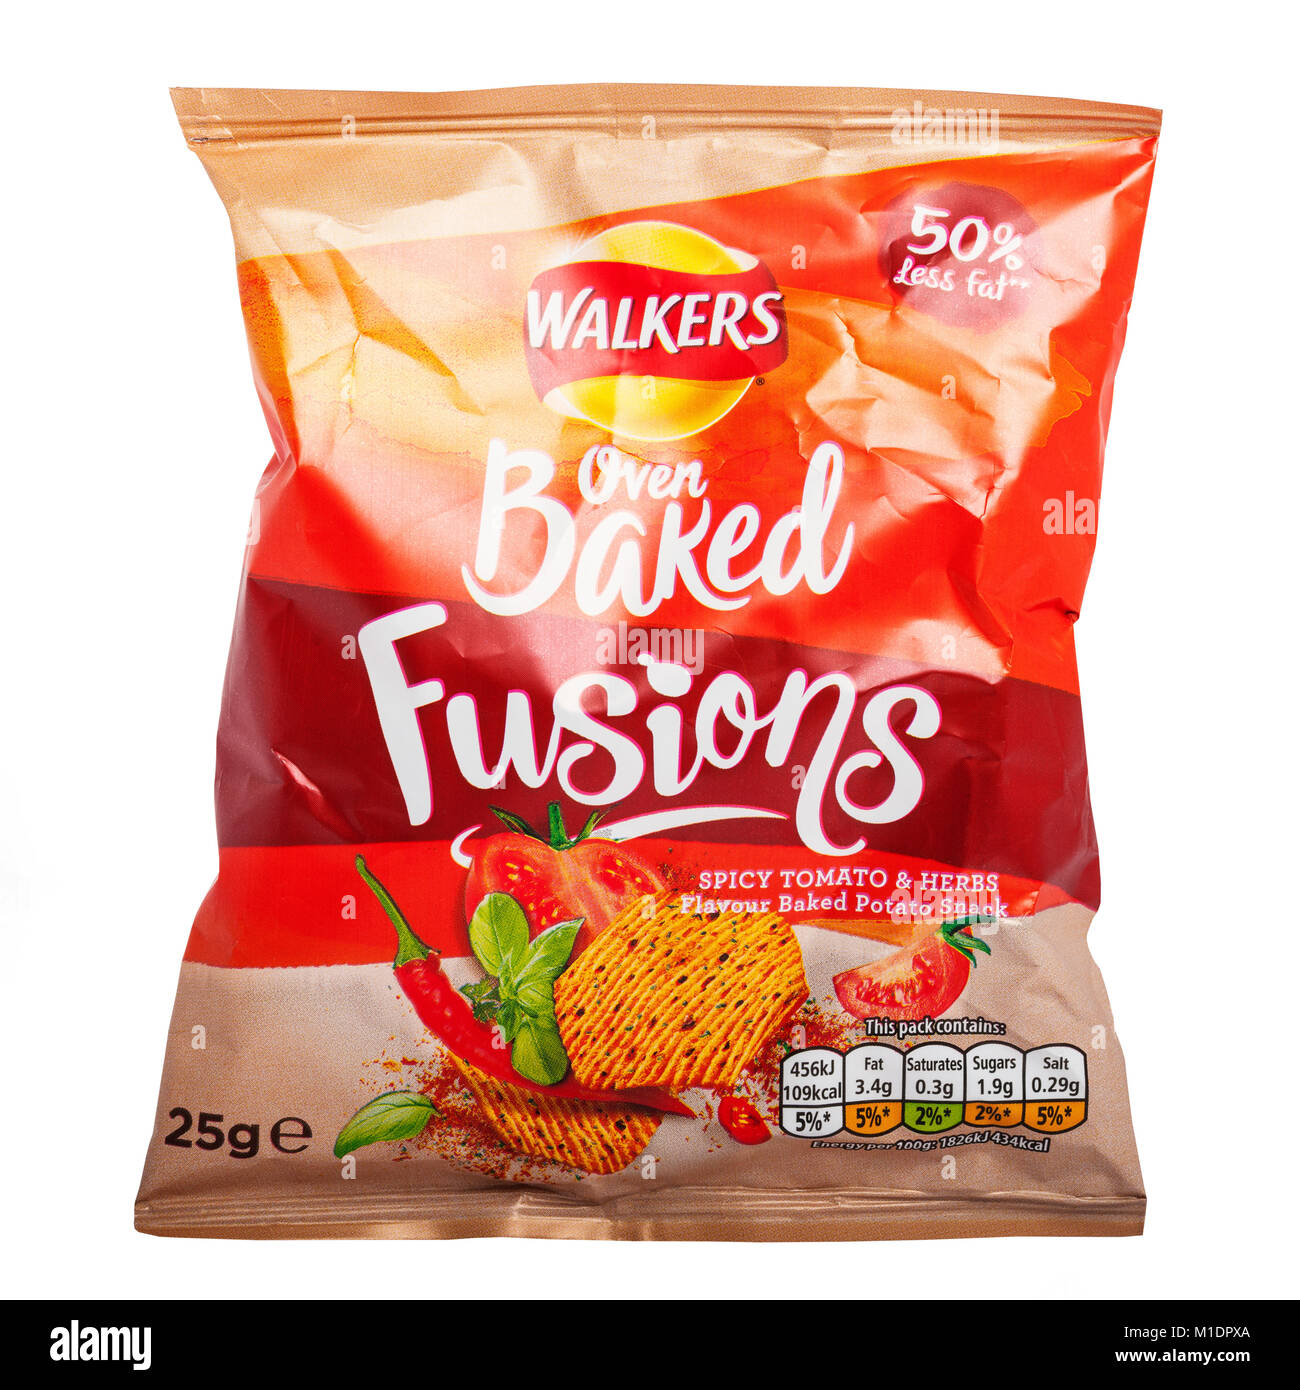 A packet of Walkers oven baked spicy tomato & herbs flavour fusions crisps with 50% less fat on a white background Stock Photo